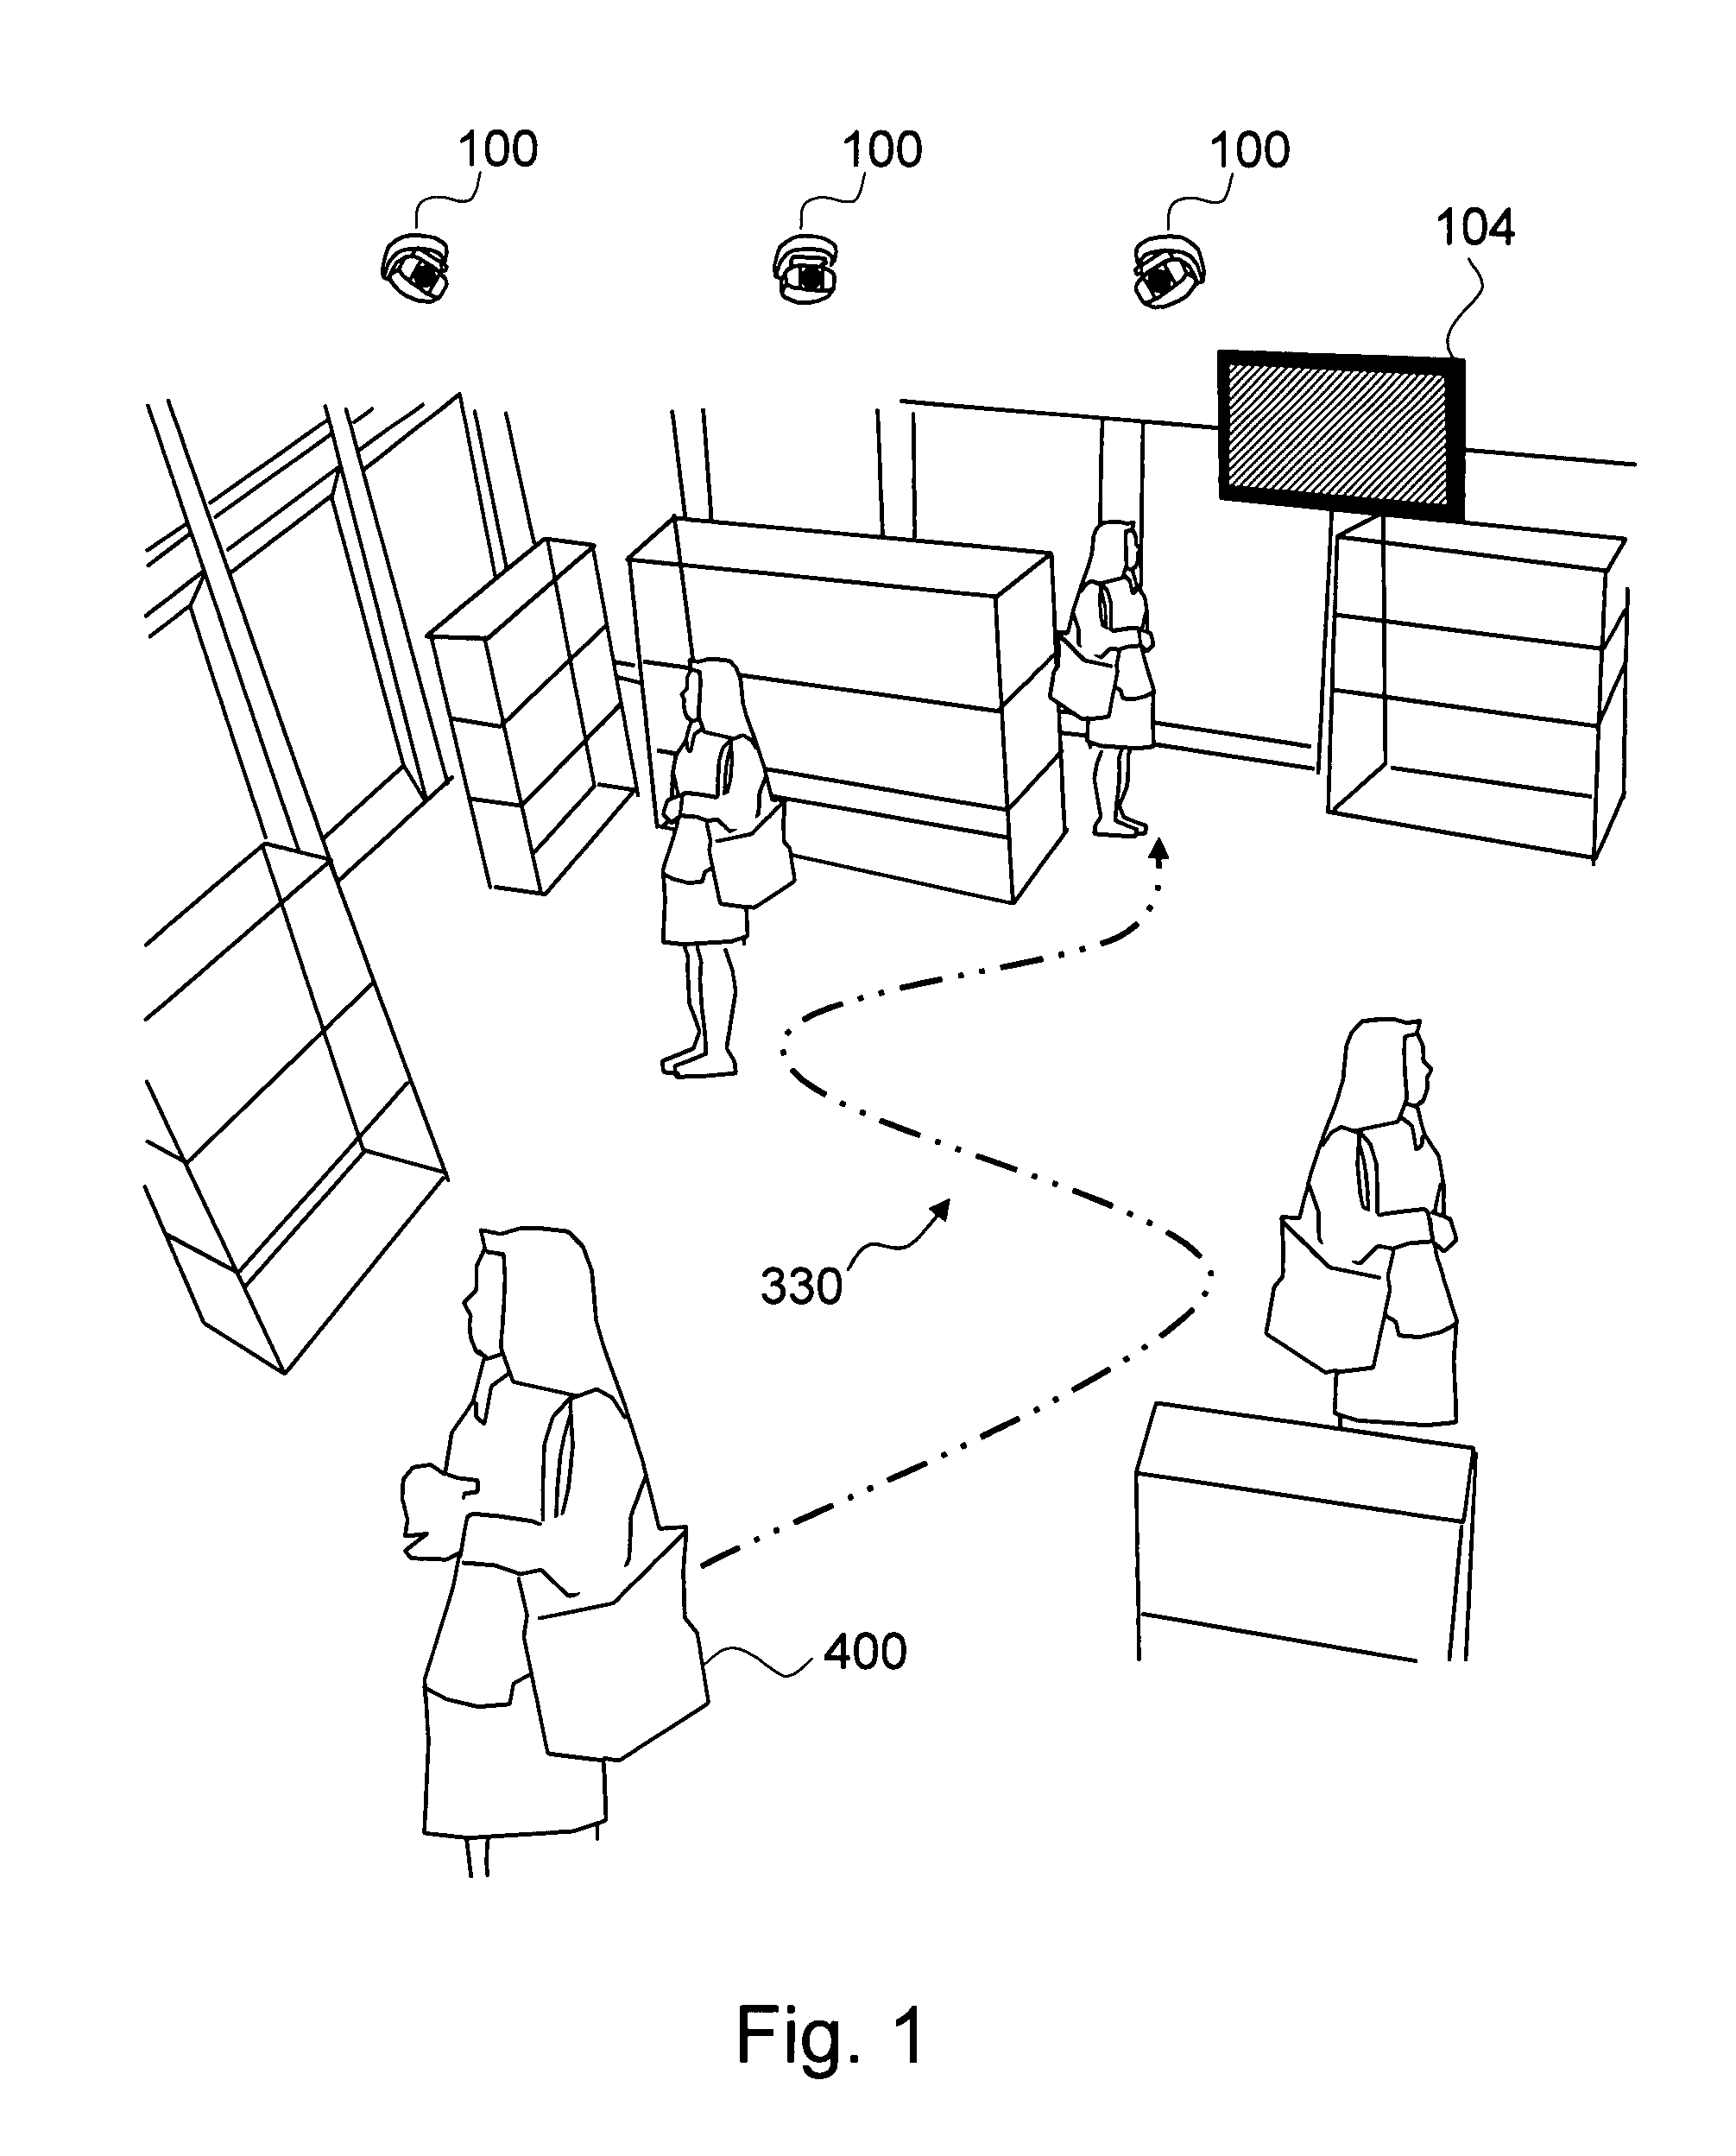 Method and system for narrowcasting based on automatic analysis of customer behavior in a retail store